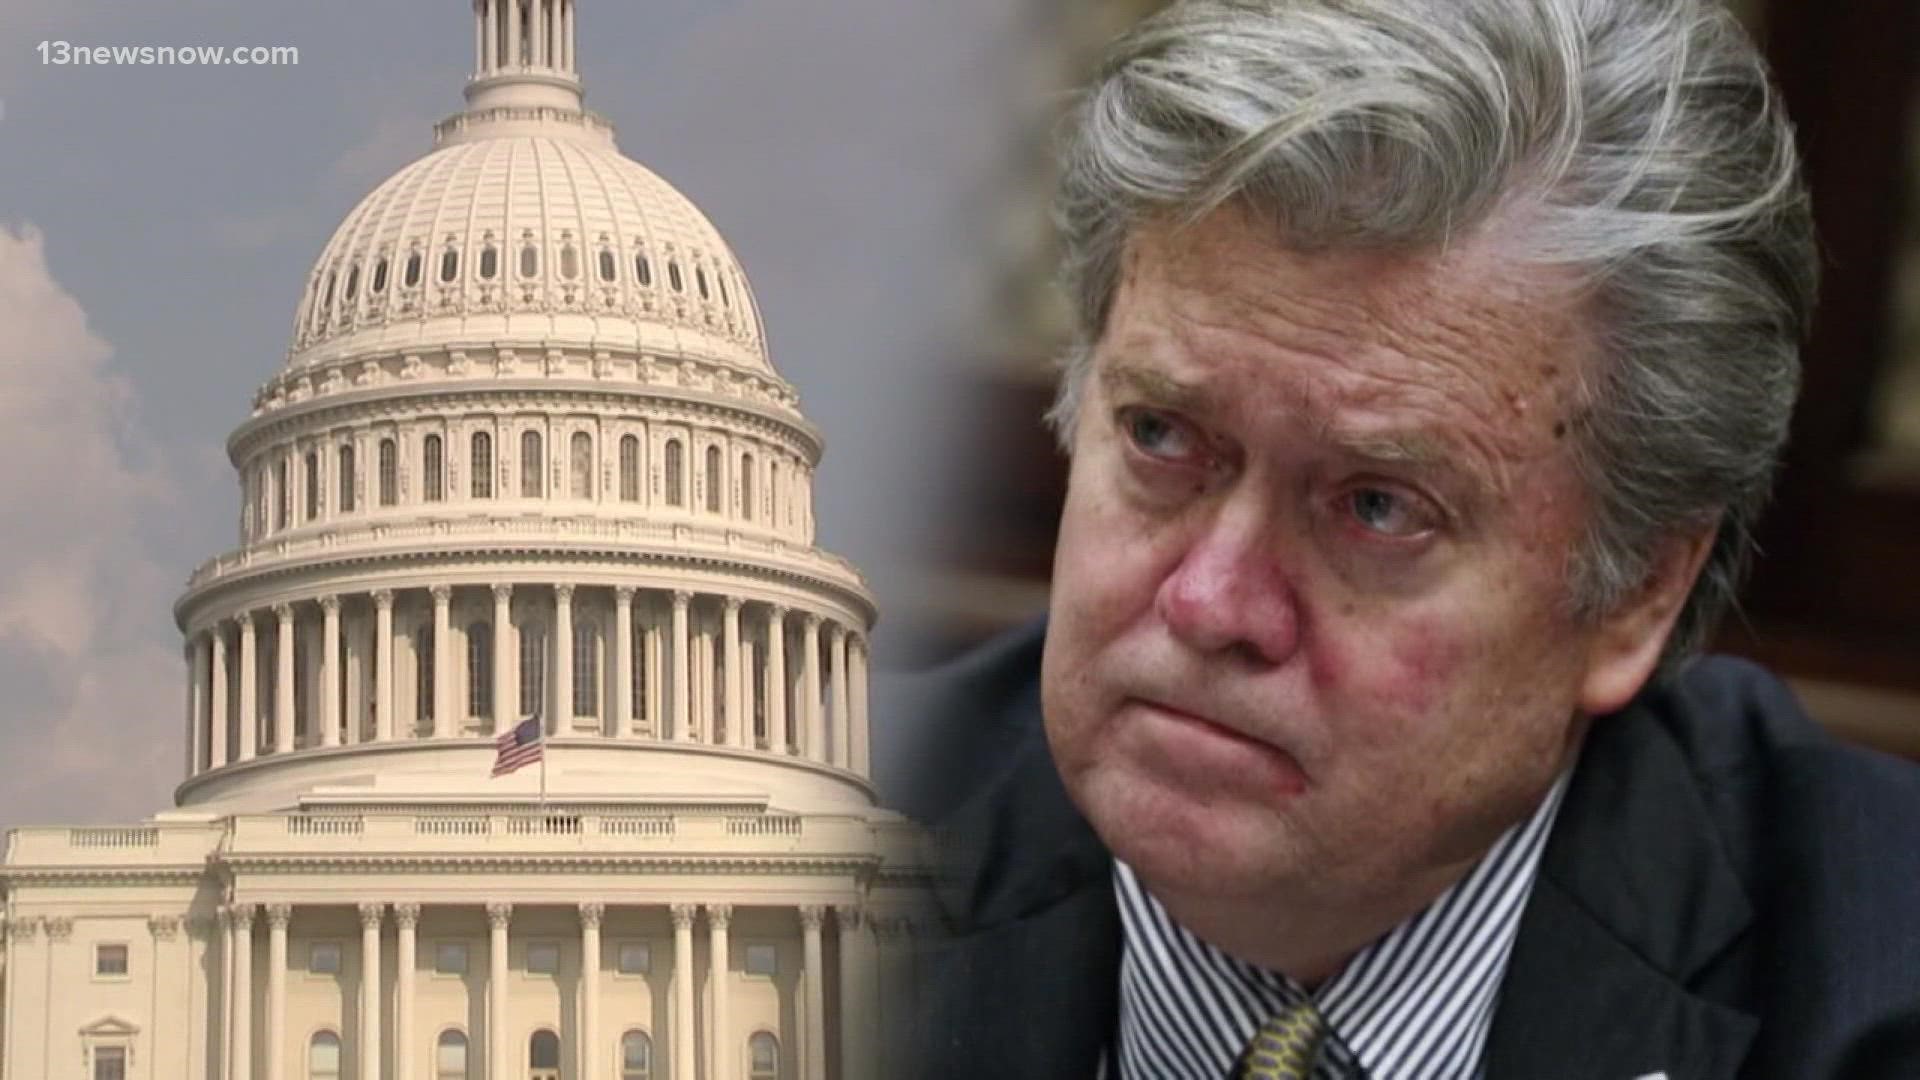 Bannon is facing criminal charges for refusing to comply with a subpoena from the congressional committee investigating the deadly January 6 attack on the capitol.